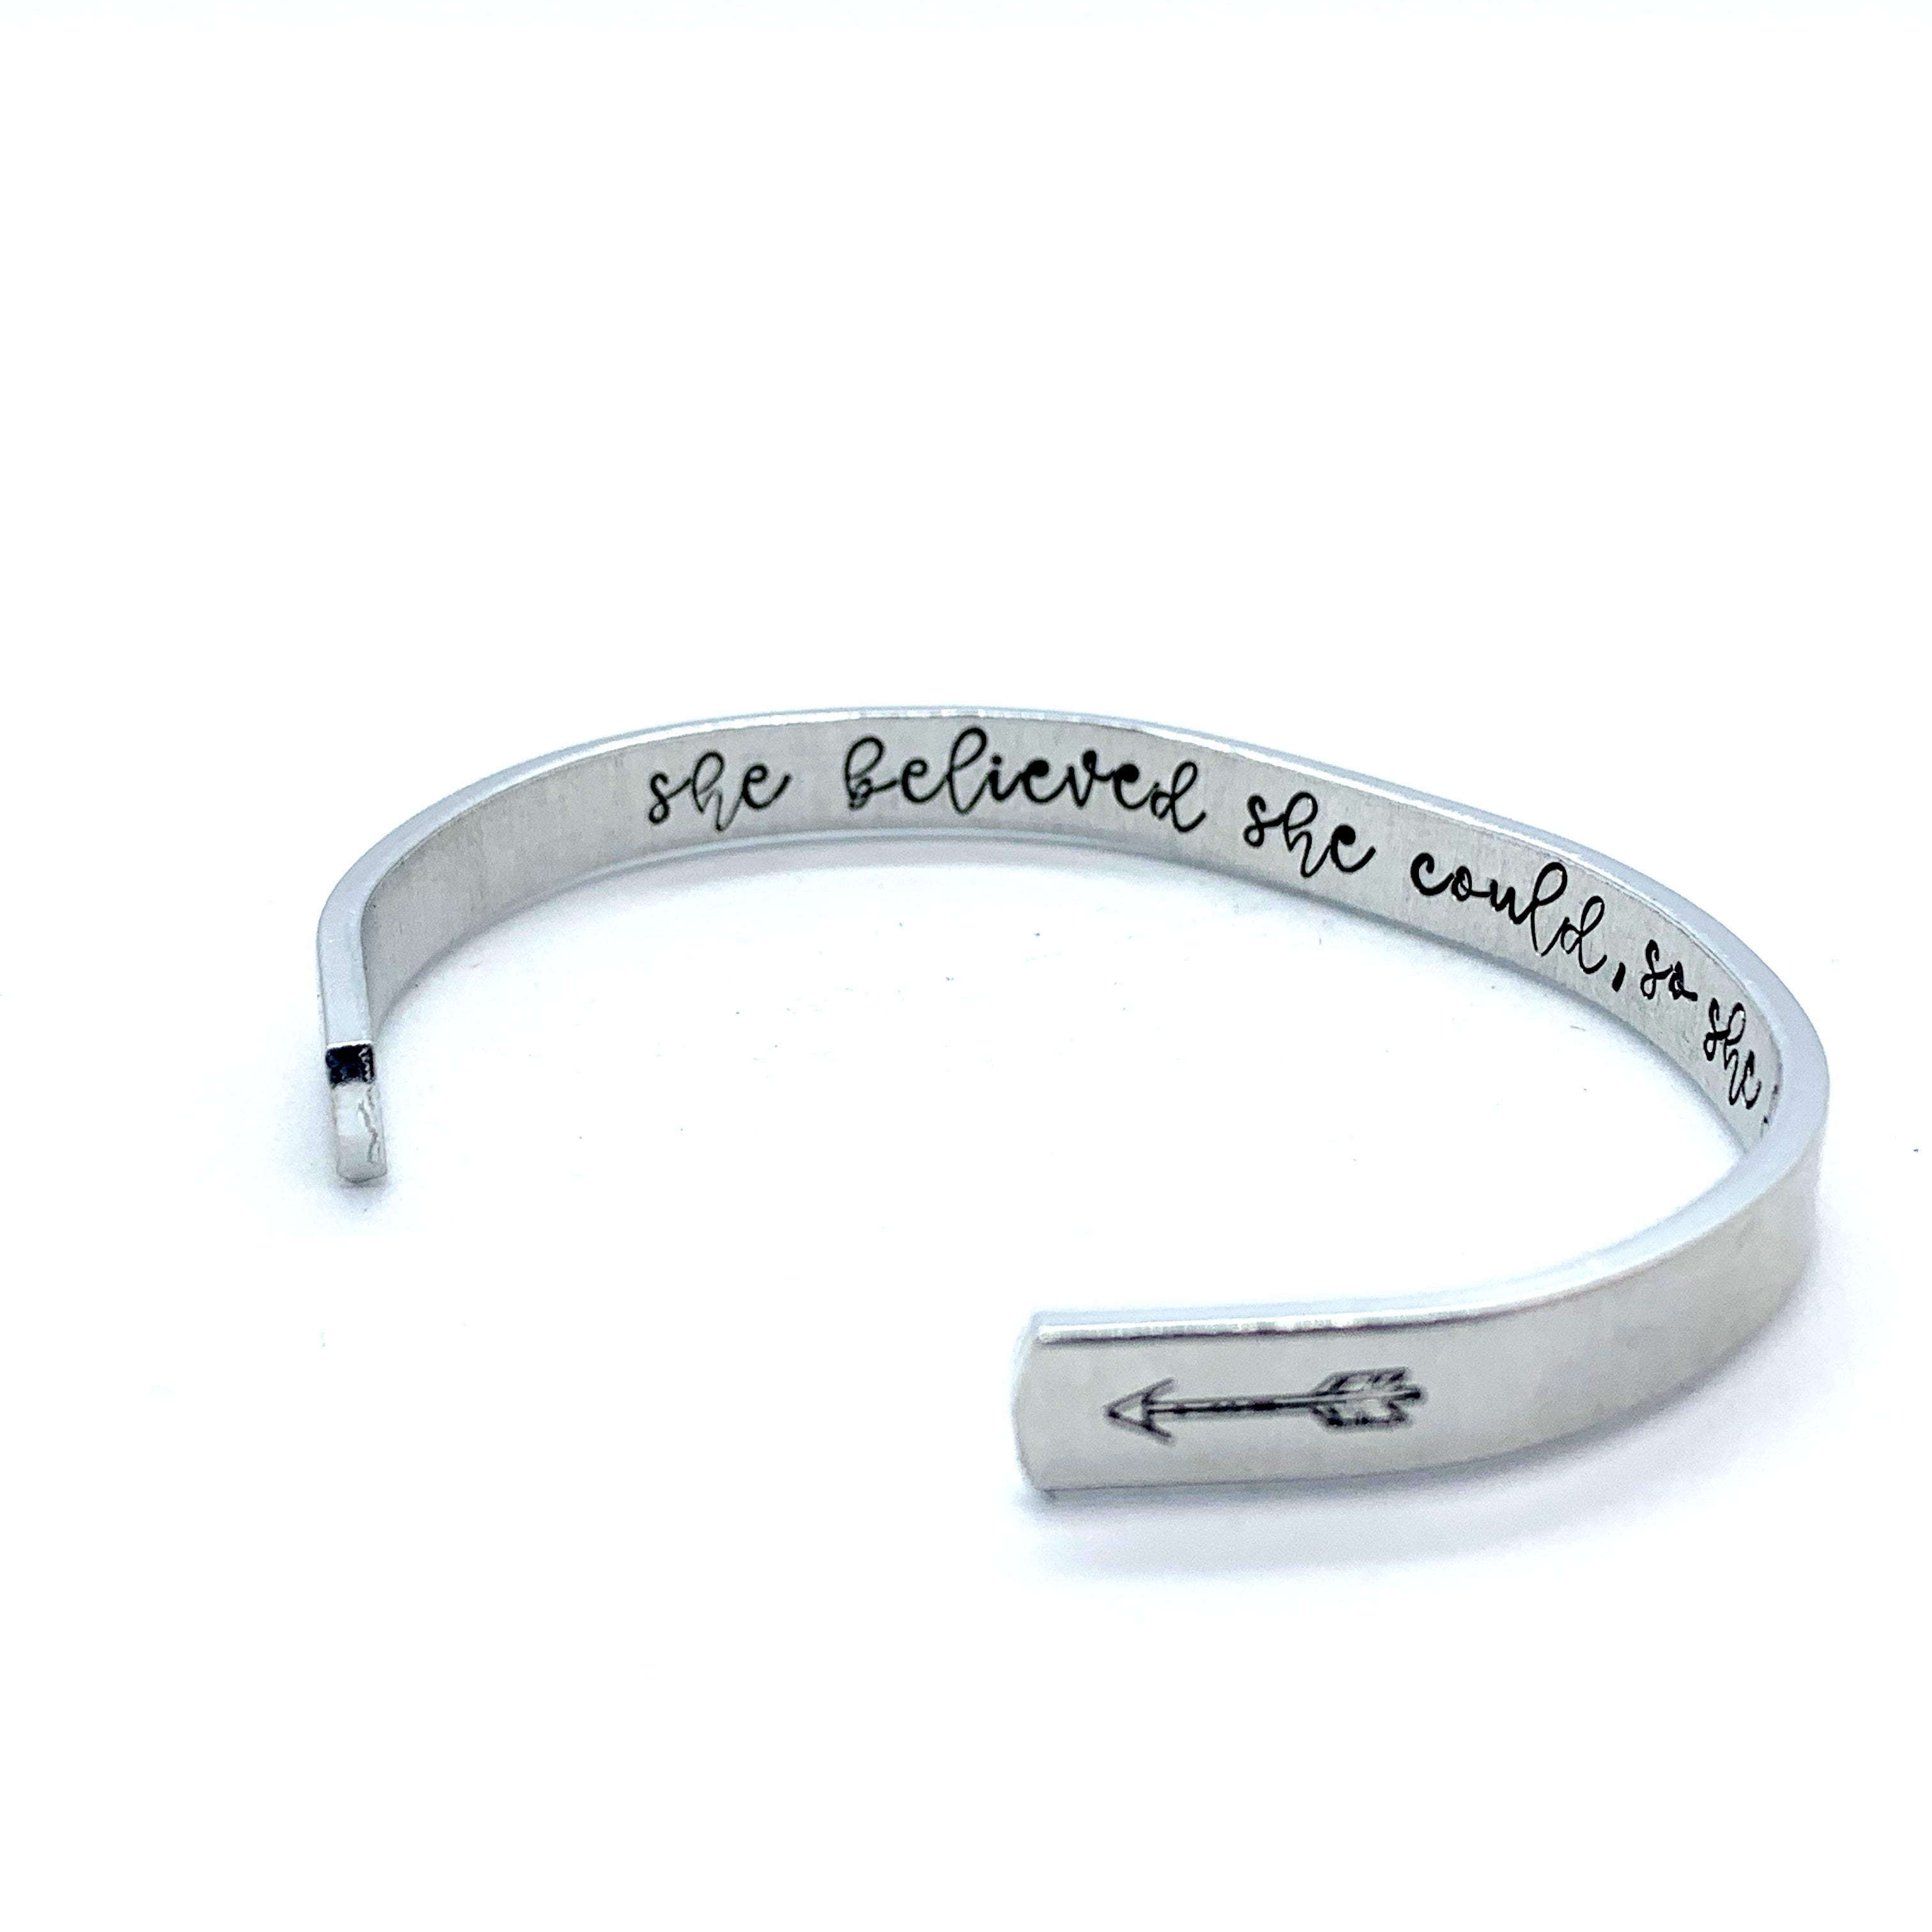 ¼ inch Aluminum Cuff -  (inside) She Believed She Could, So She Did